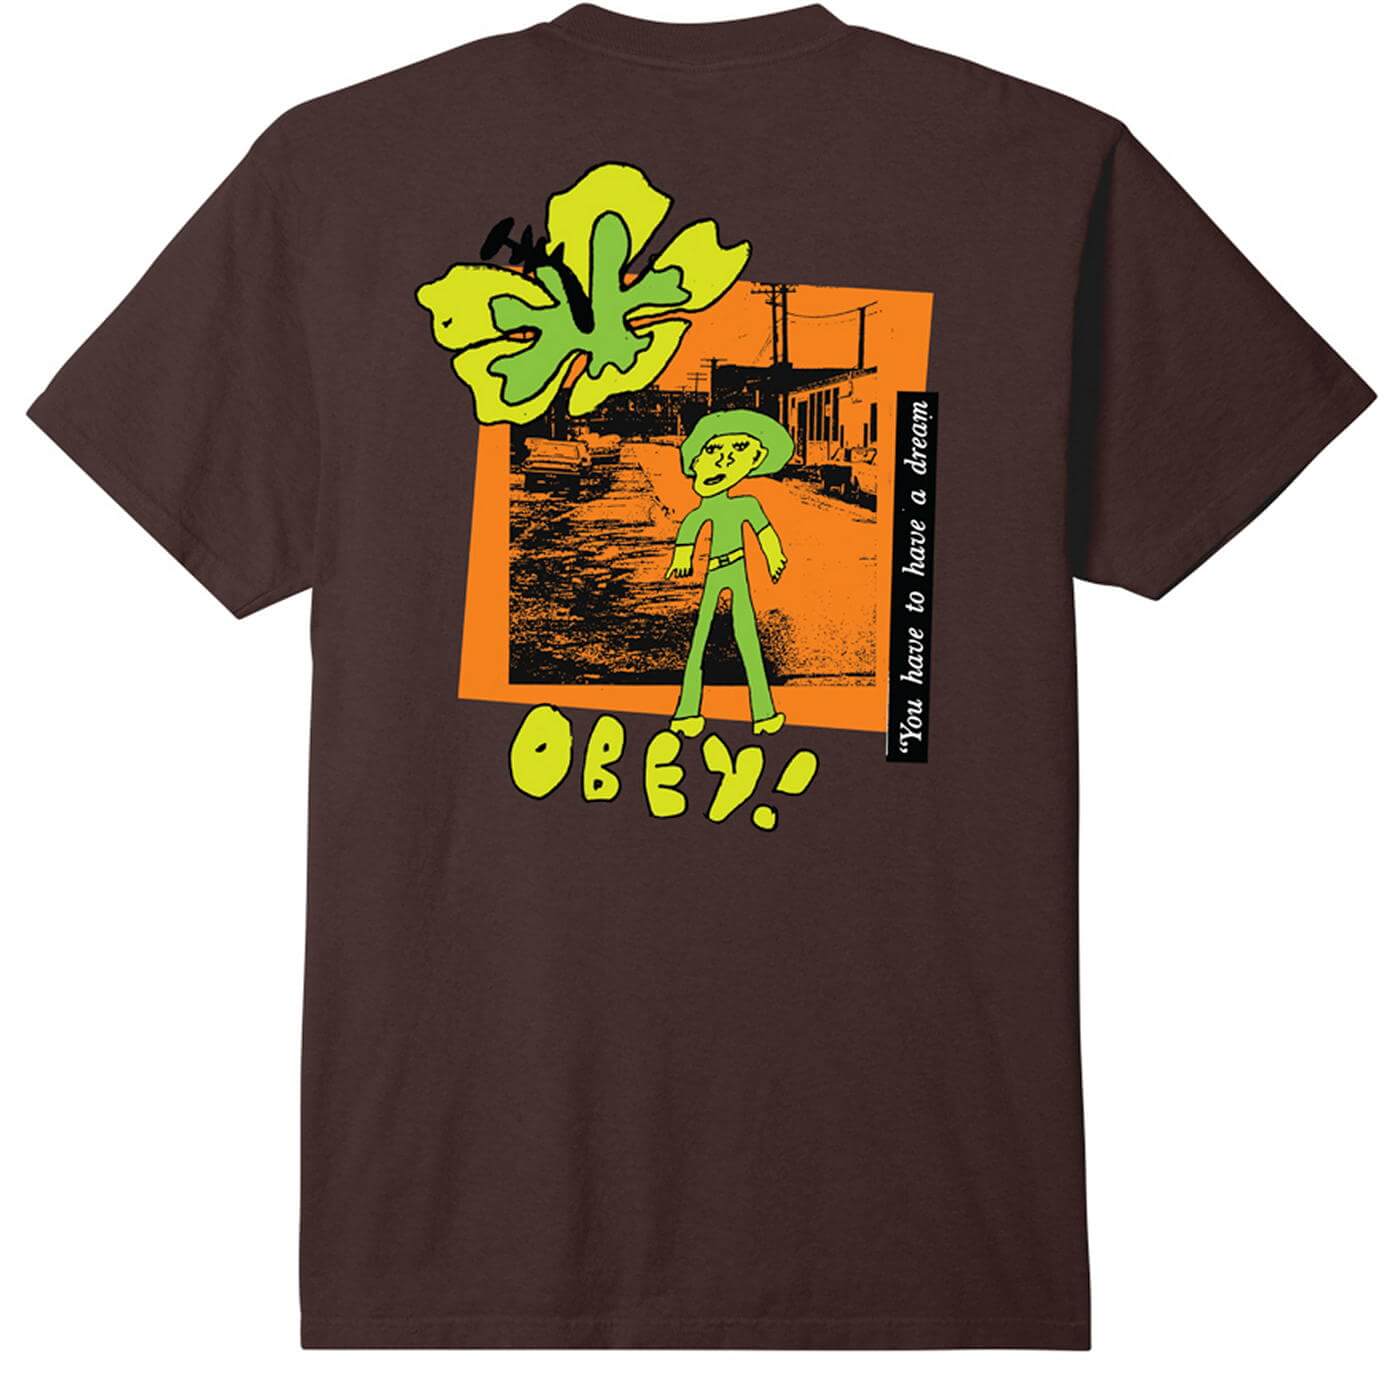 Obey You Have To Have A Dream T-Shirt - Java Brown